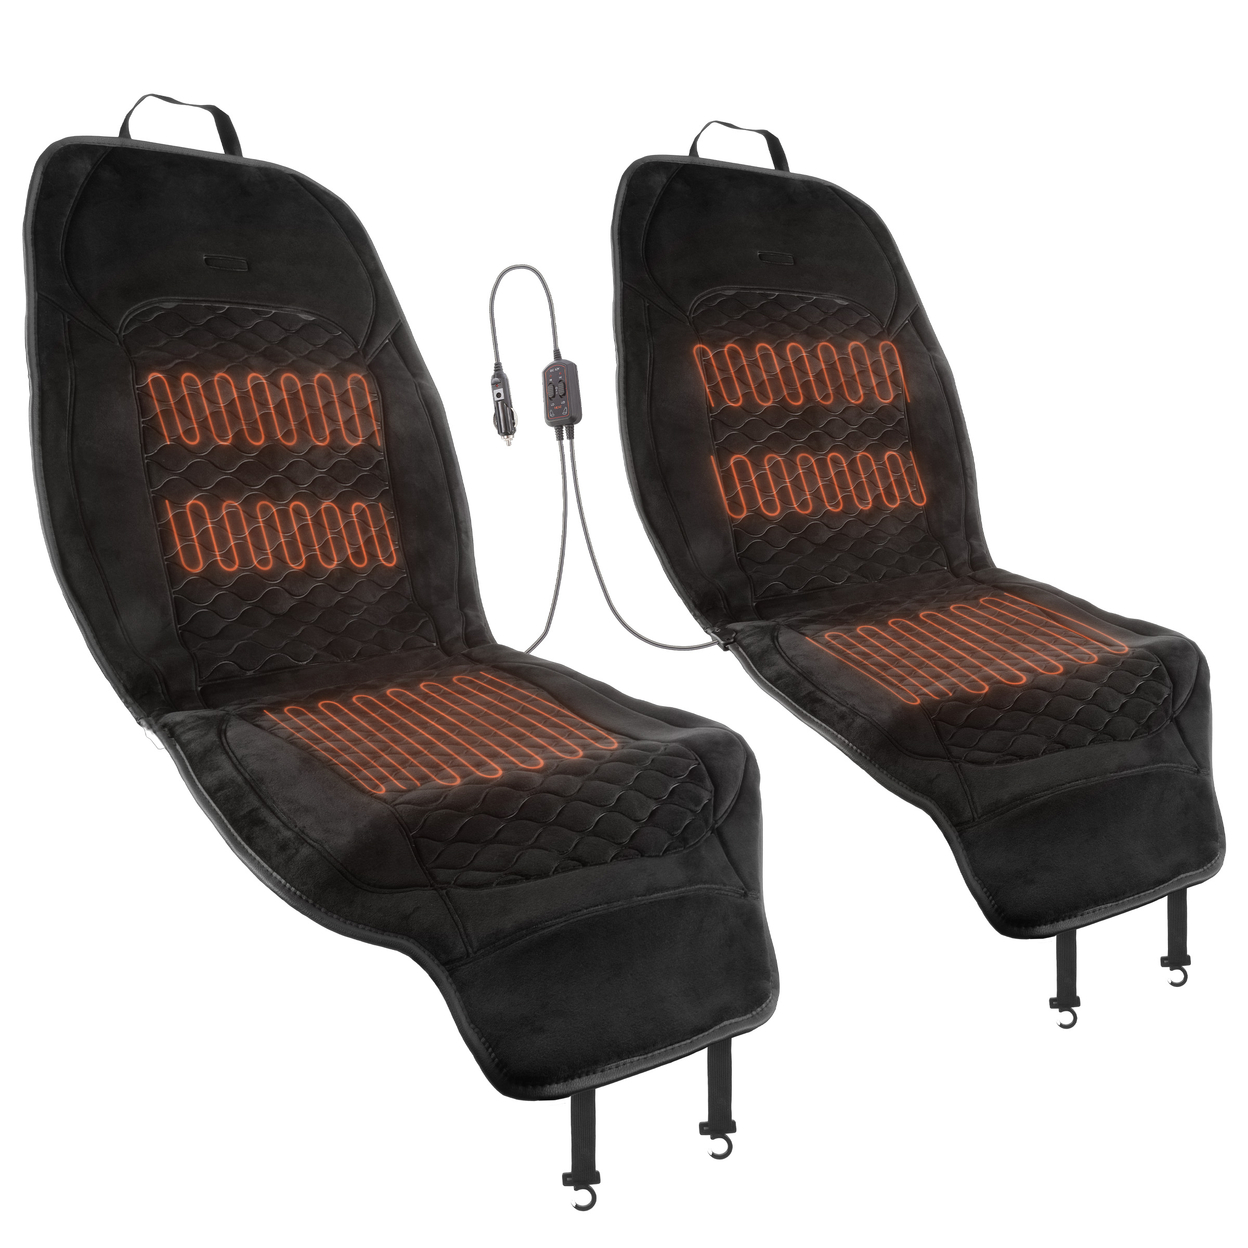 Heated Seat Covers For Cars 2Pack Universal 12V Heating Pads For Car Seats